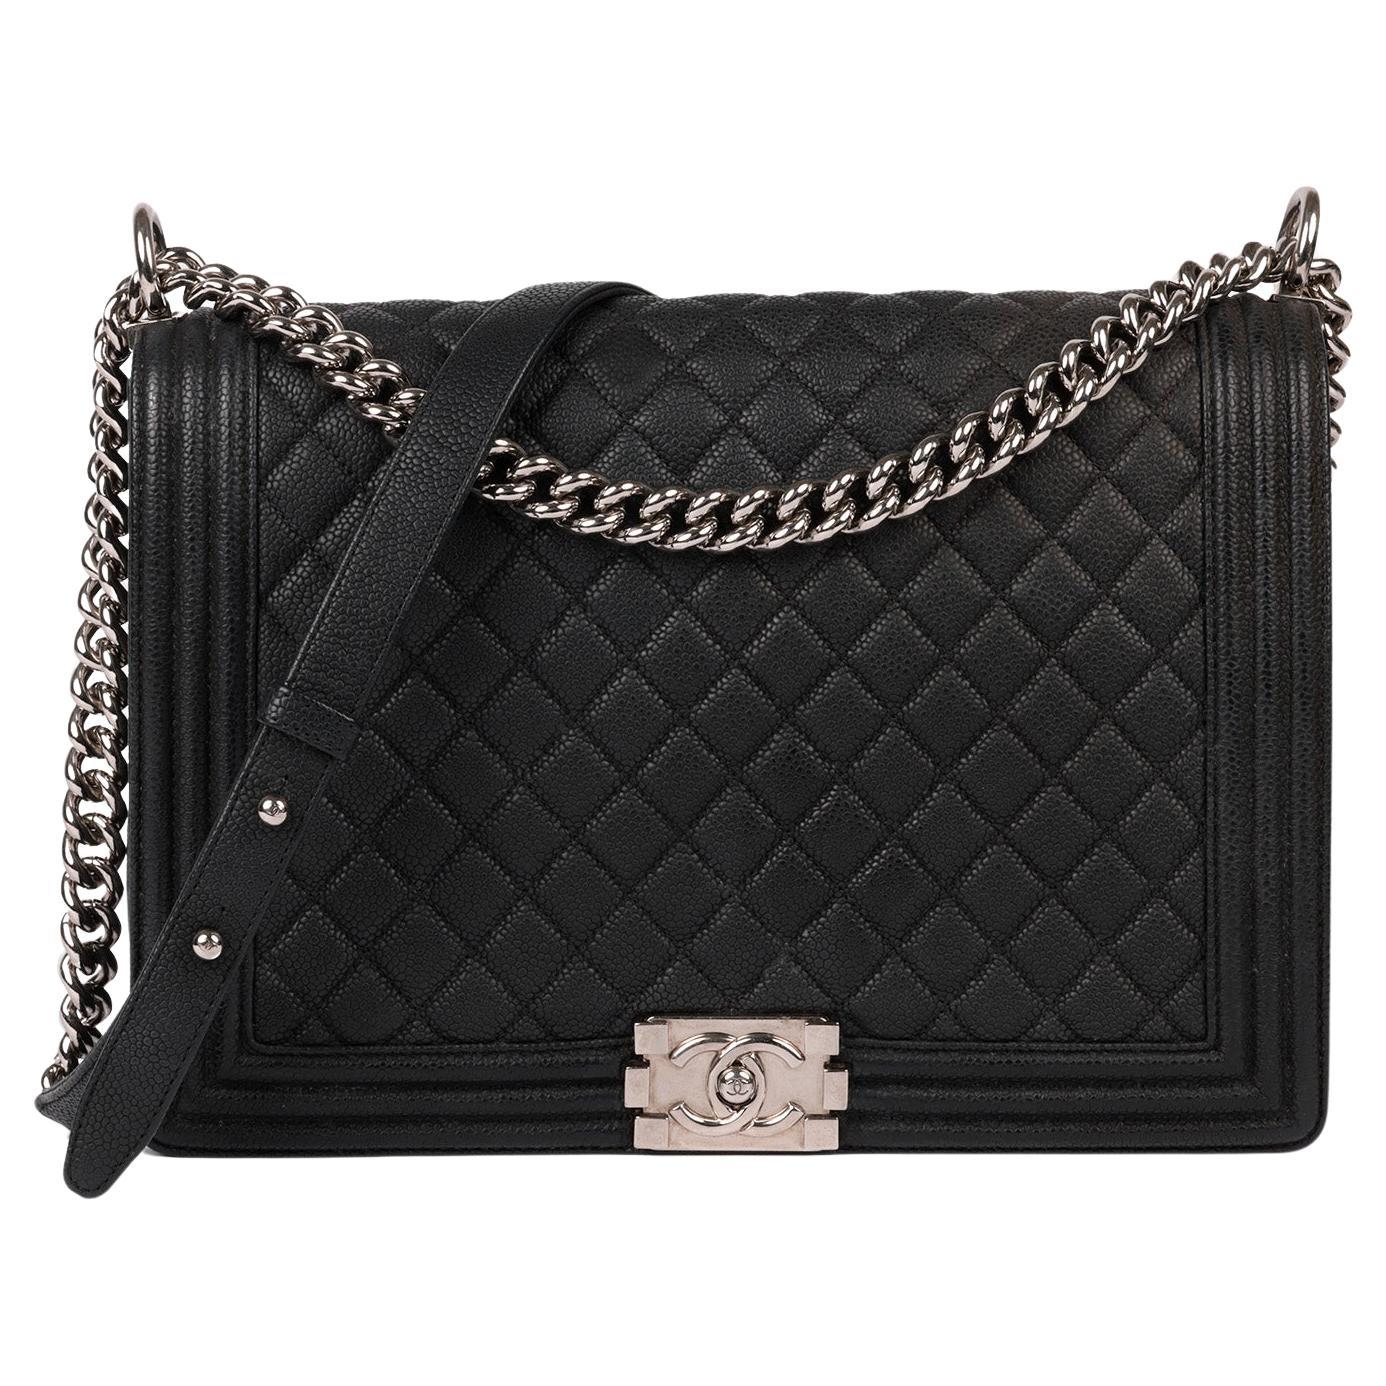 Chanel Black Quilted Caviar Leather Large Le Boy Bag For Sale